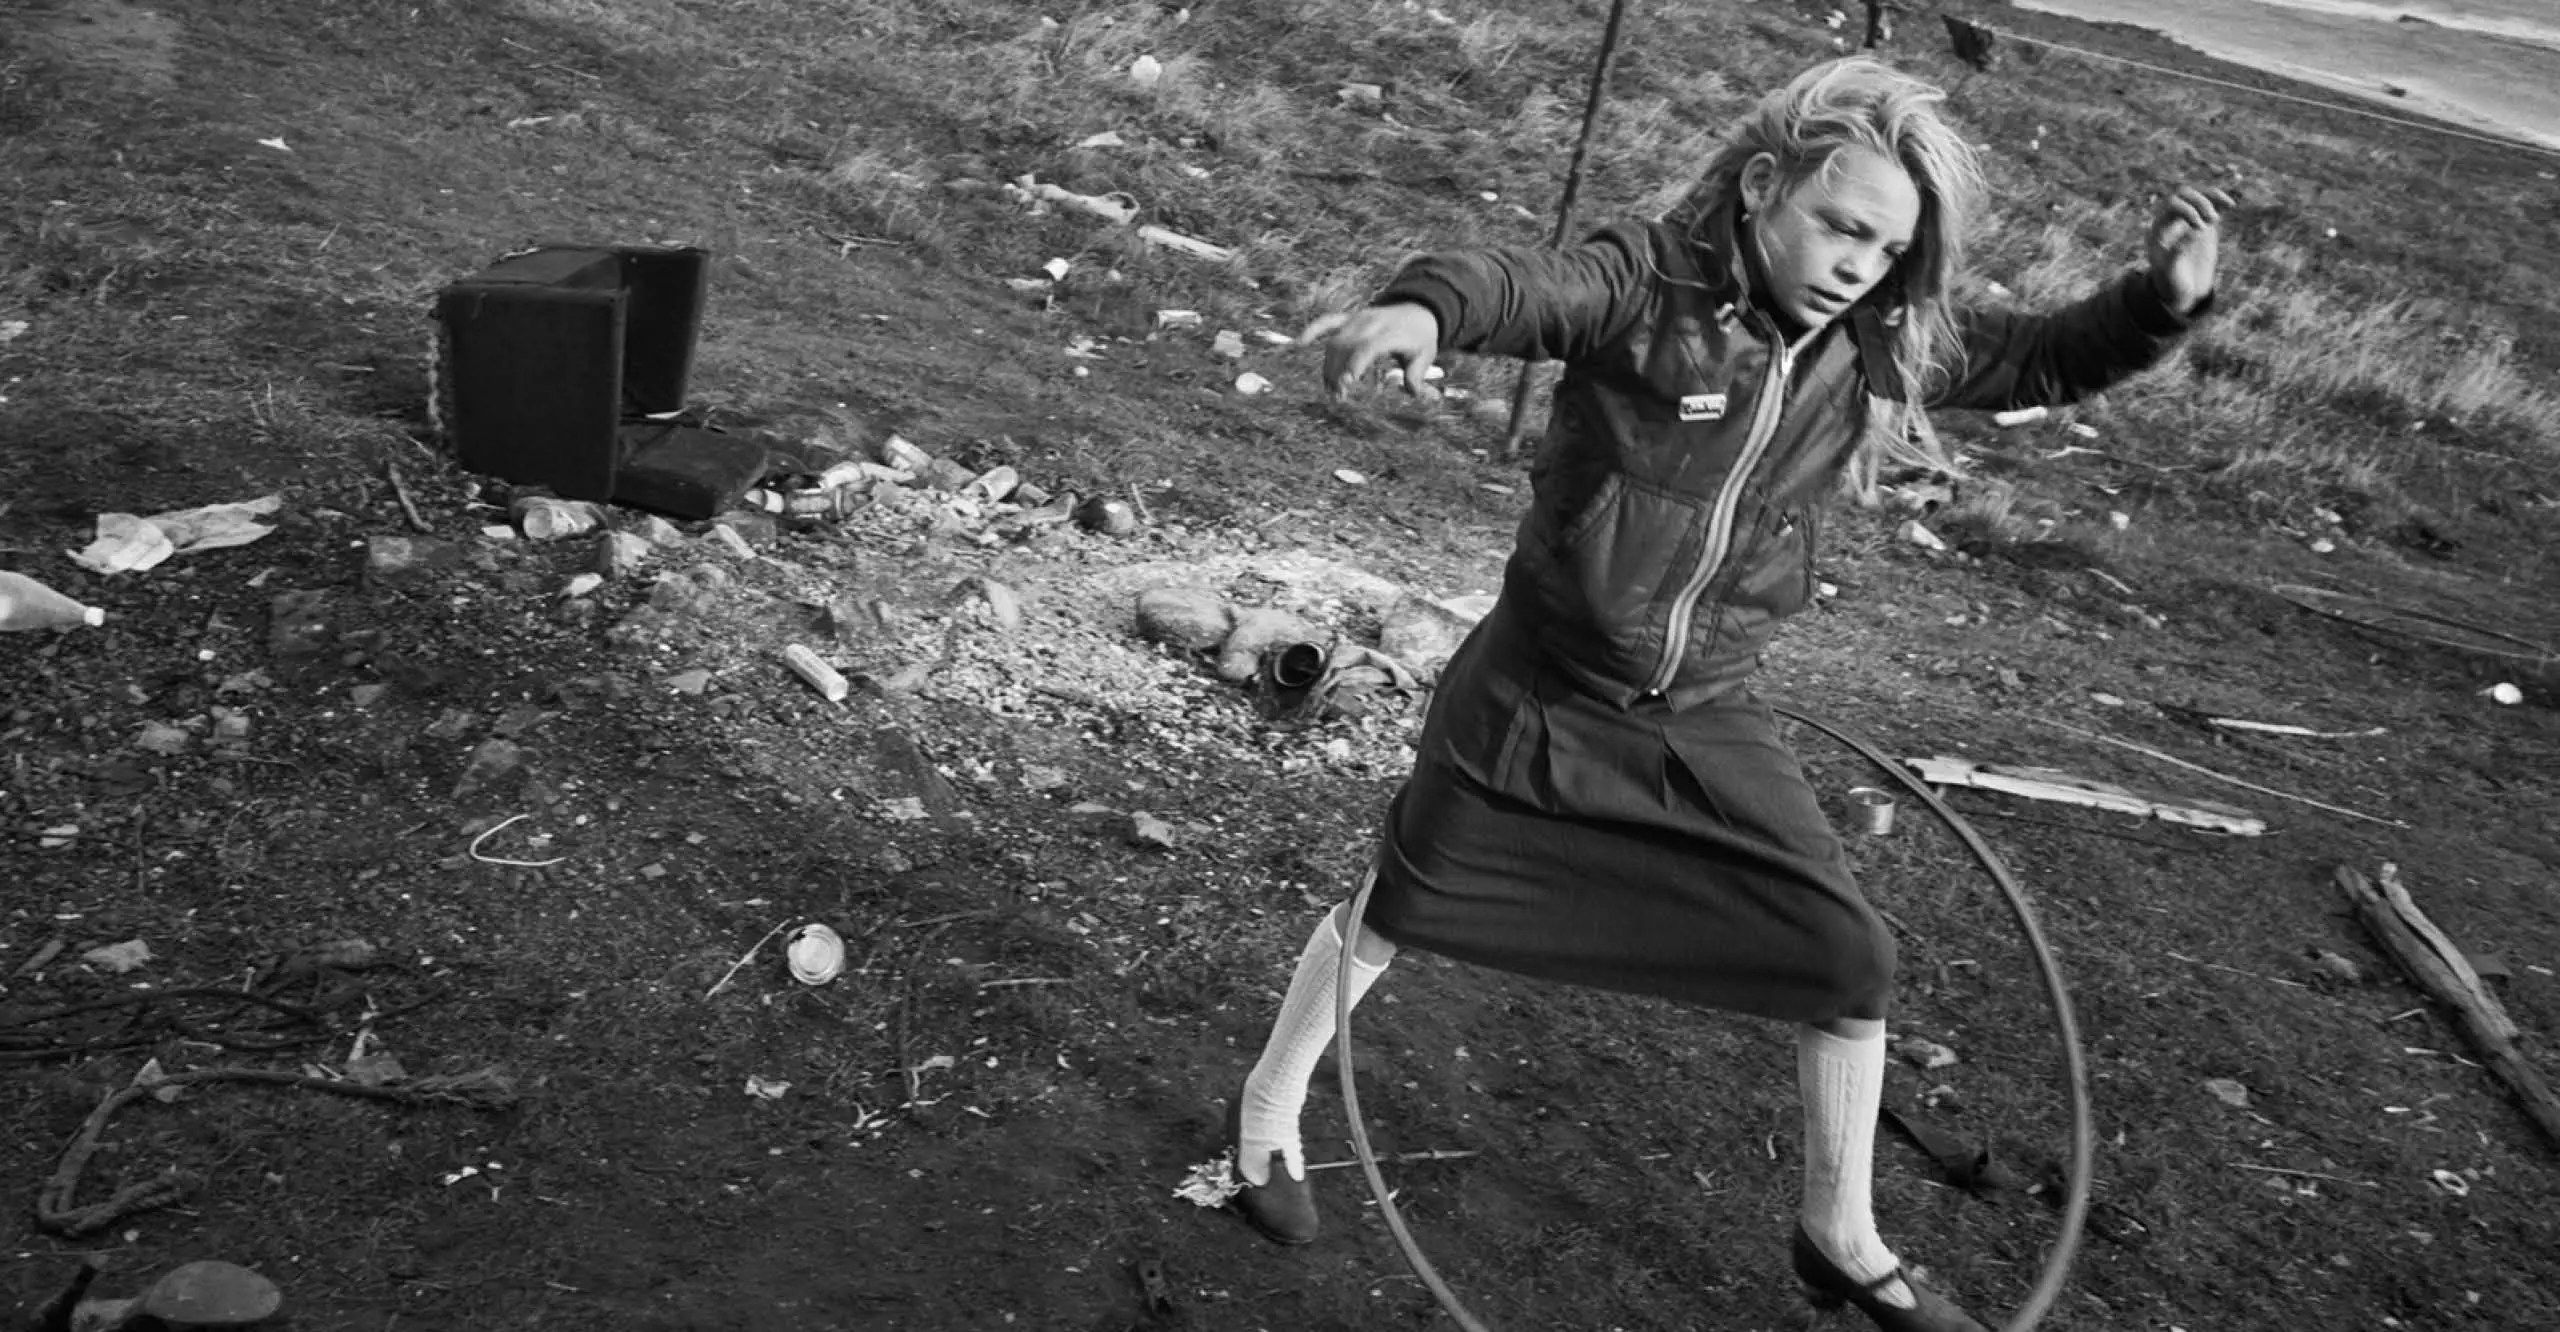 Black and white photograph of a girl playing with a hula-hoop, against a deindustrialized landscape